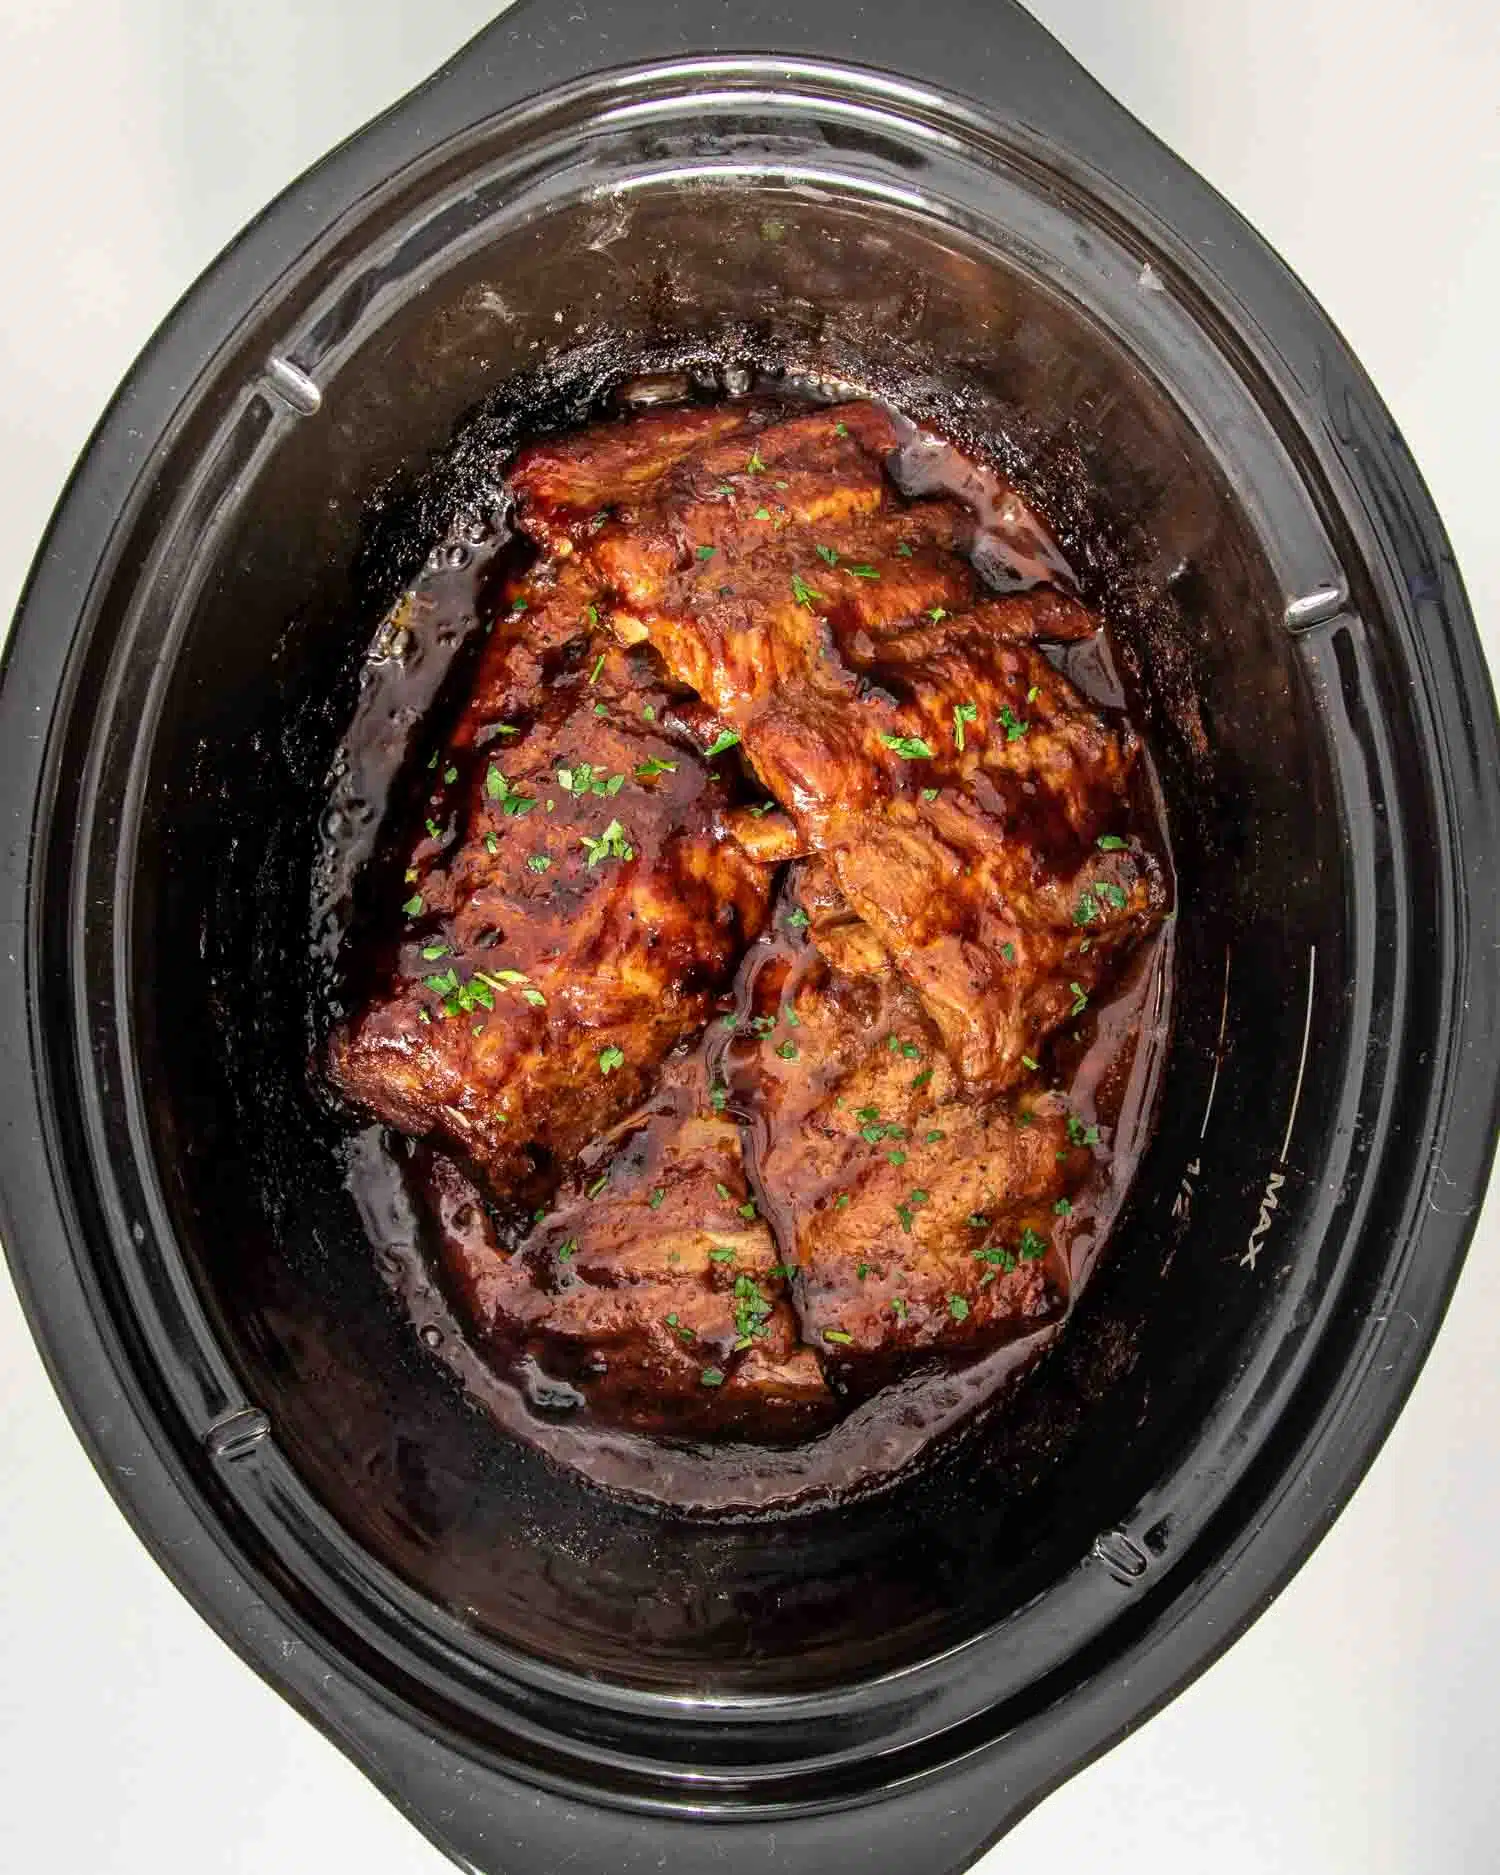 process shots showing how to make slow cooker ribs.